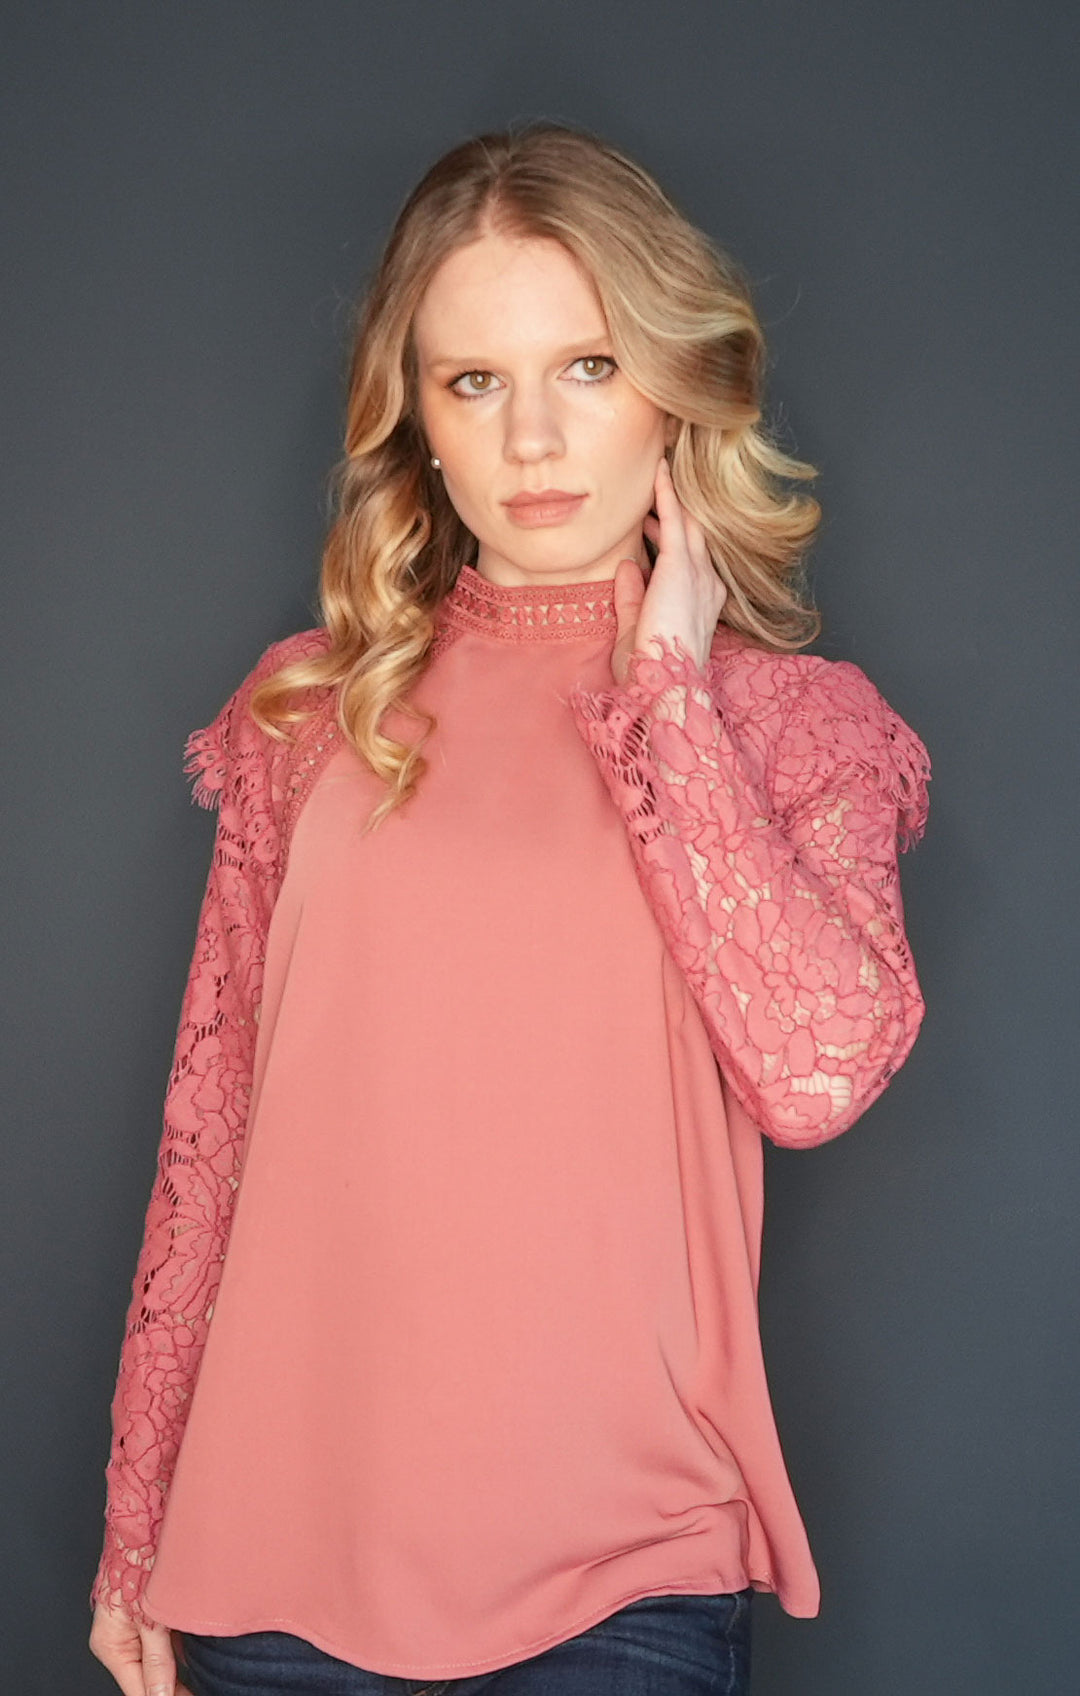 Rose Pink Vintage Blouse with Long Lace Sleeves and Mock Neck